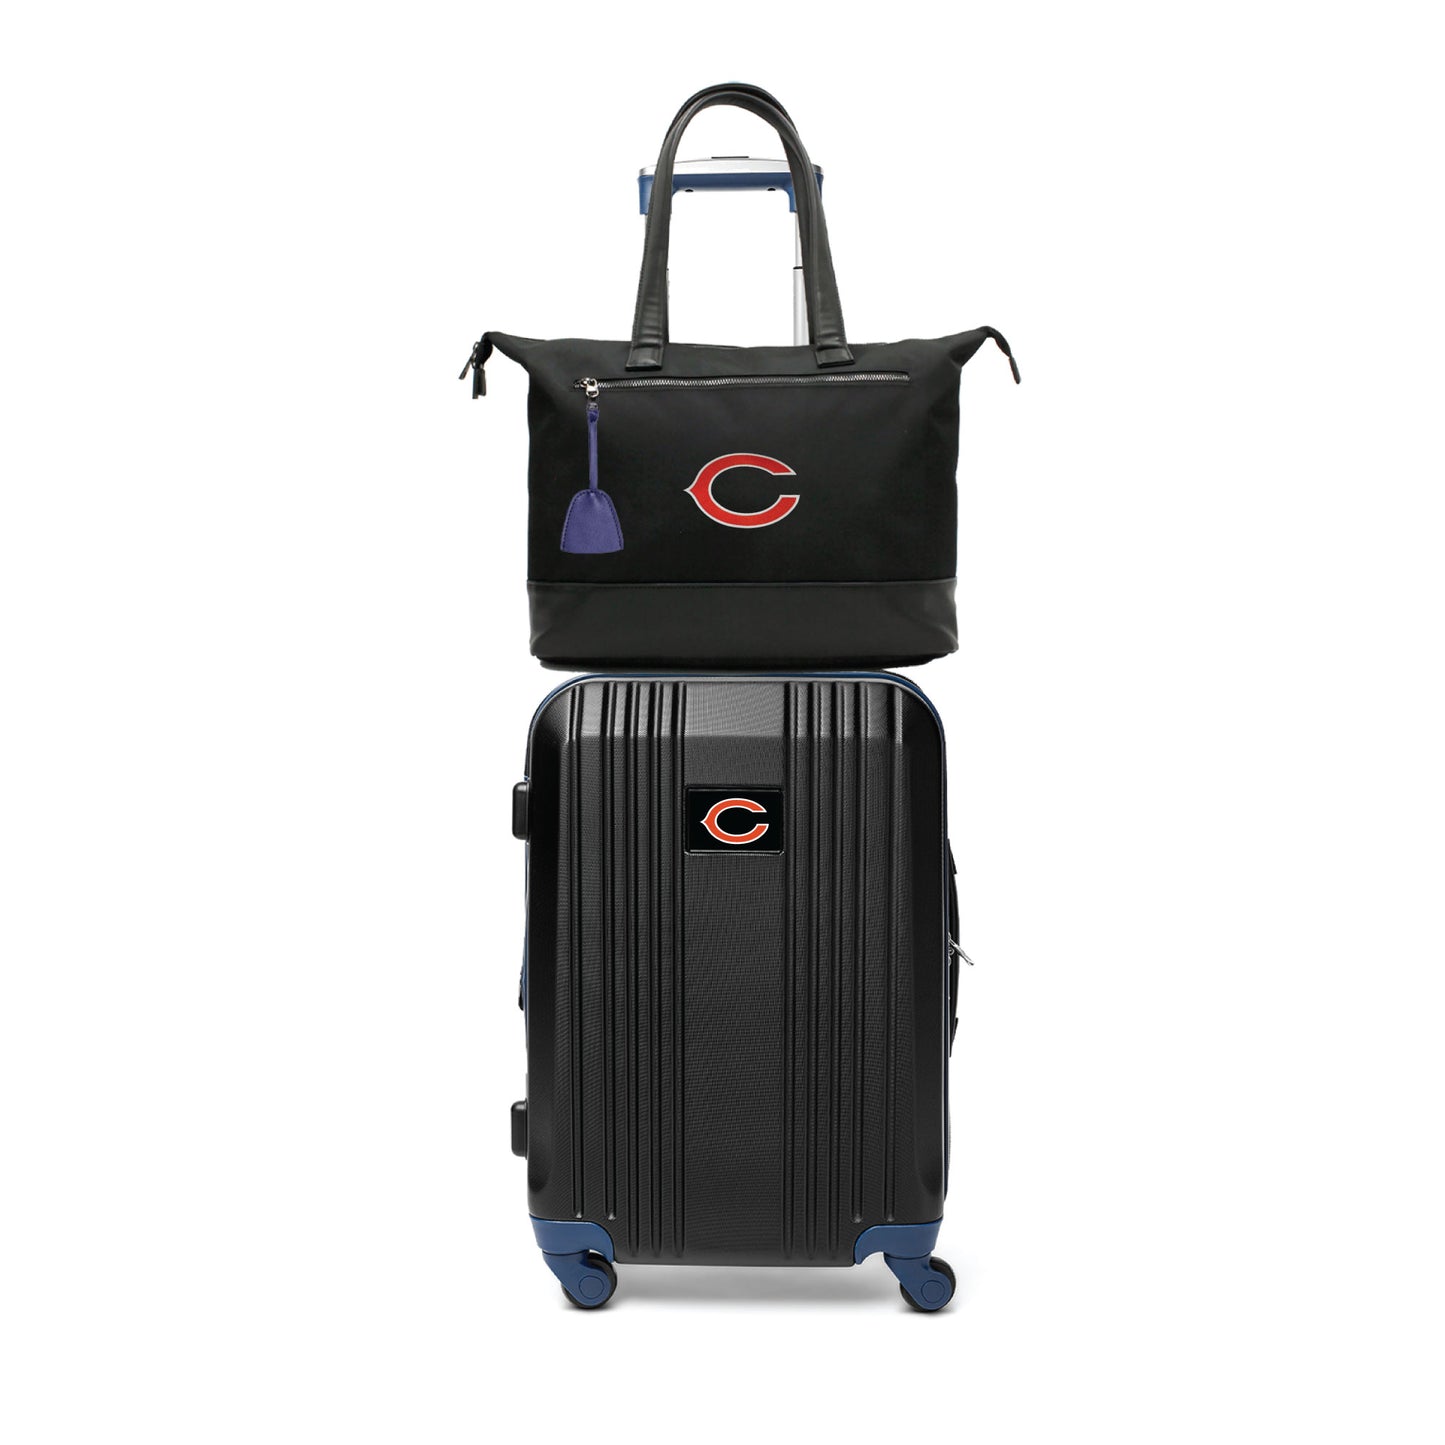 Chicago Bears Premium Laptop Tote Bag and Luggage Set